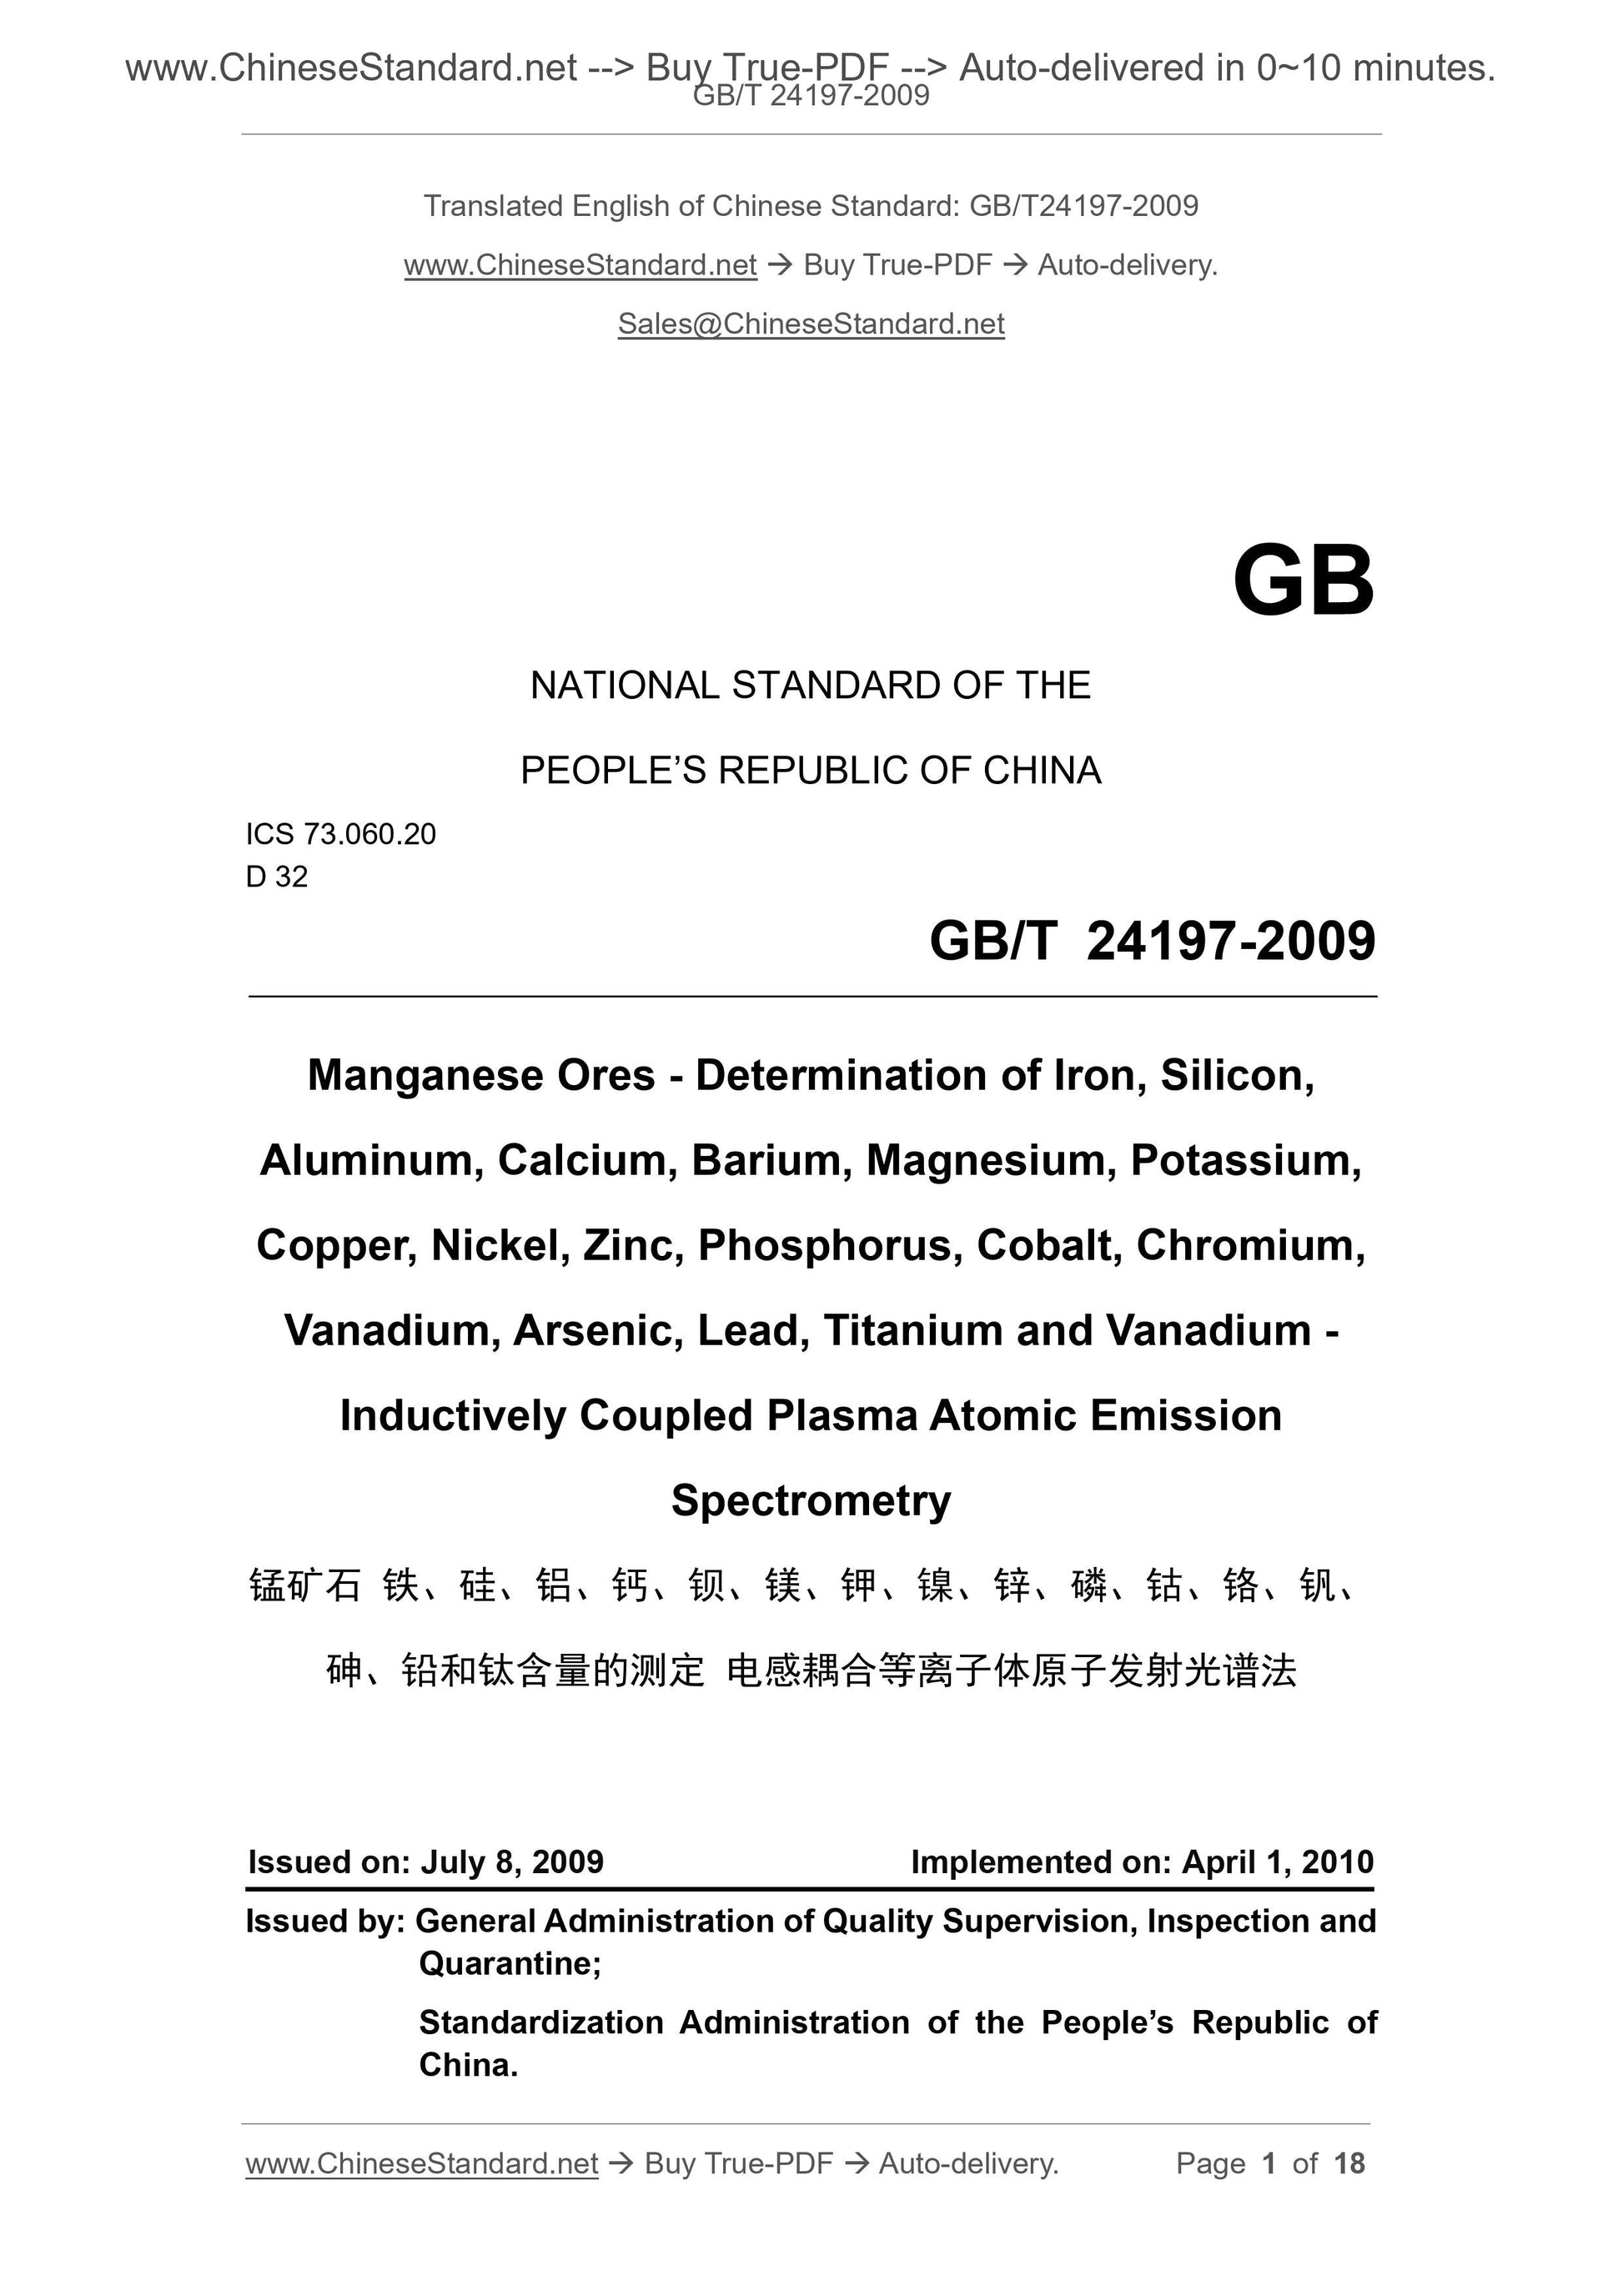 GB/T 24197-2009 Page 1